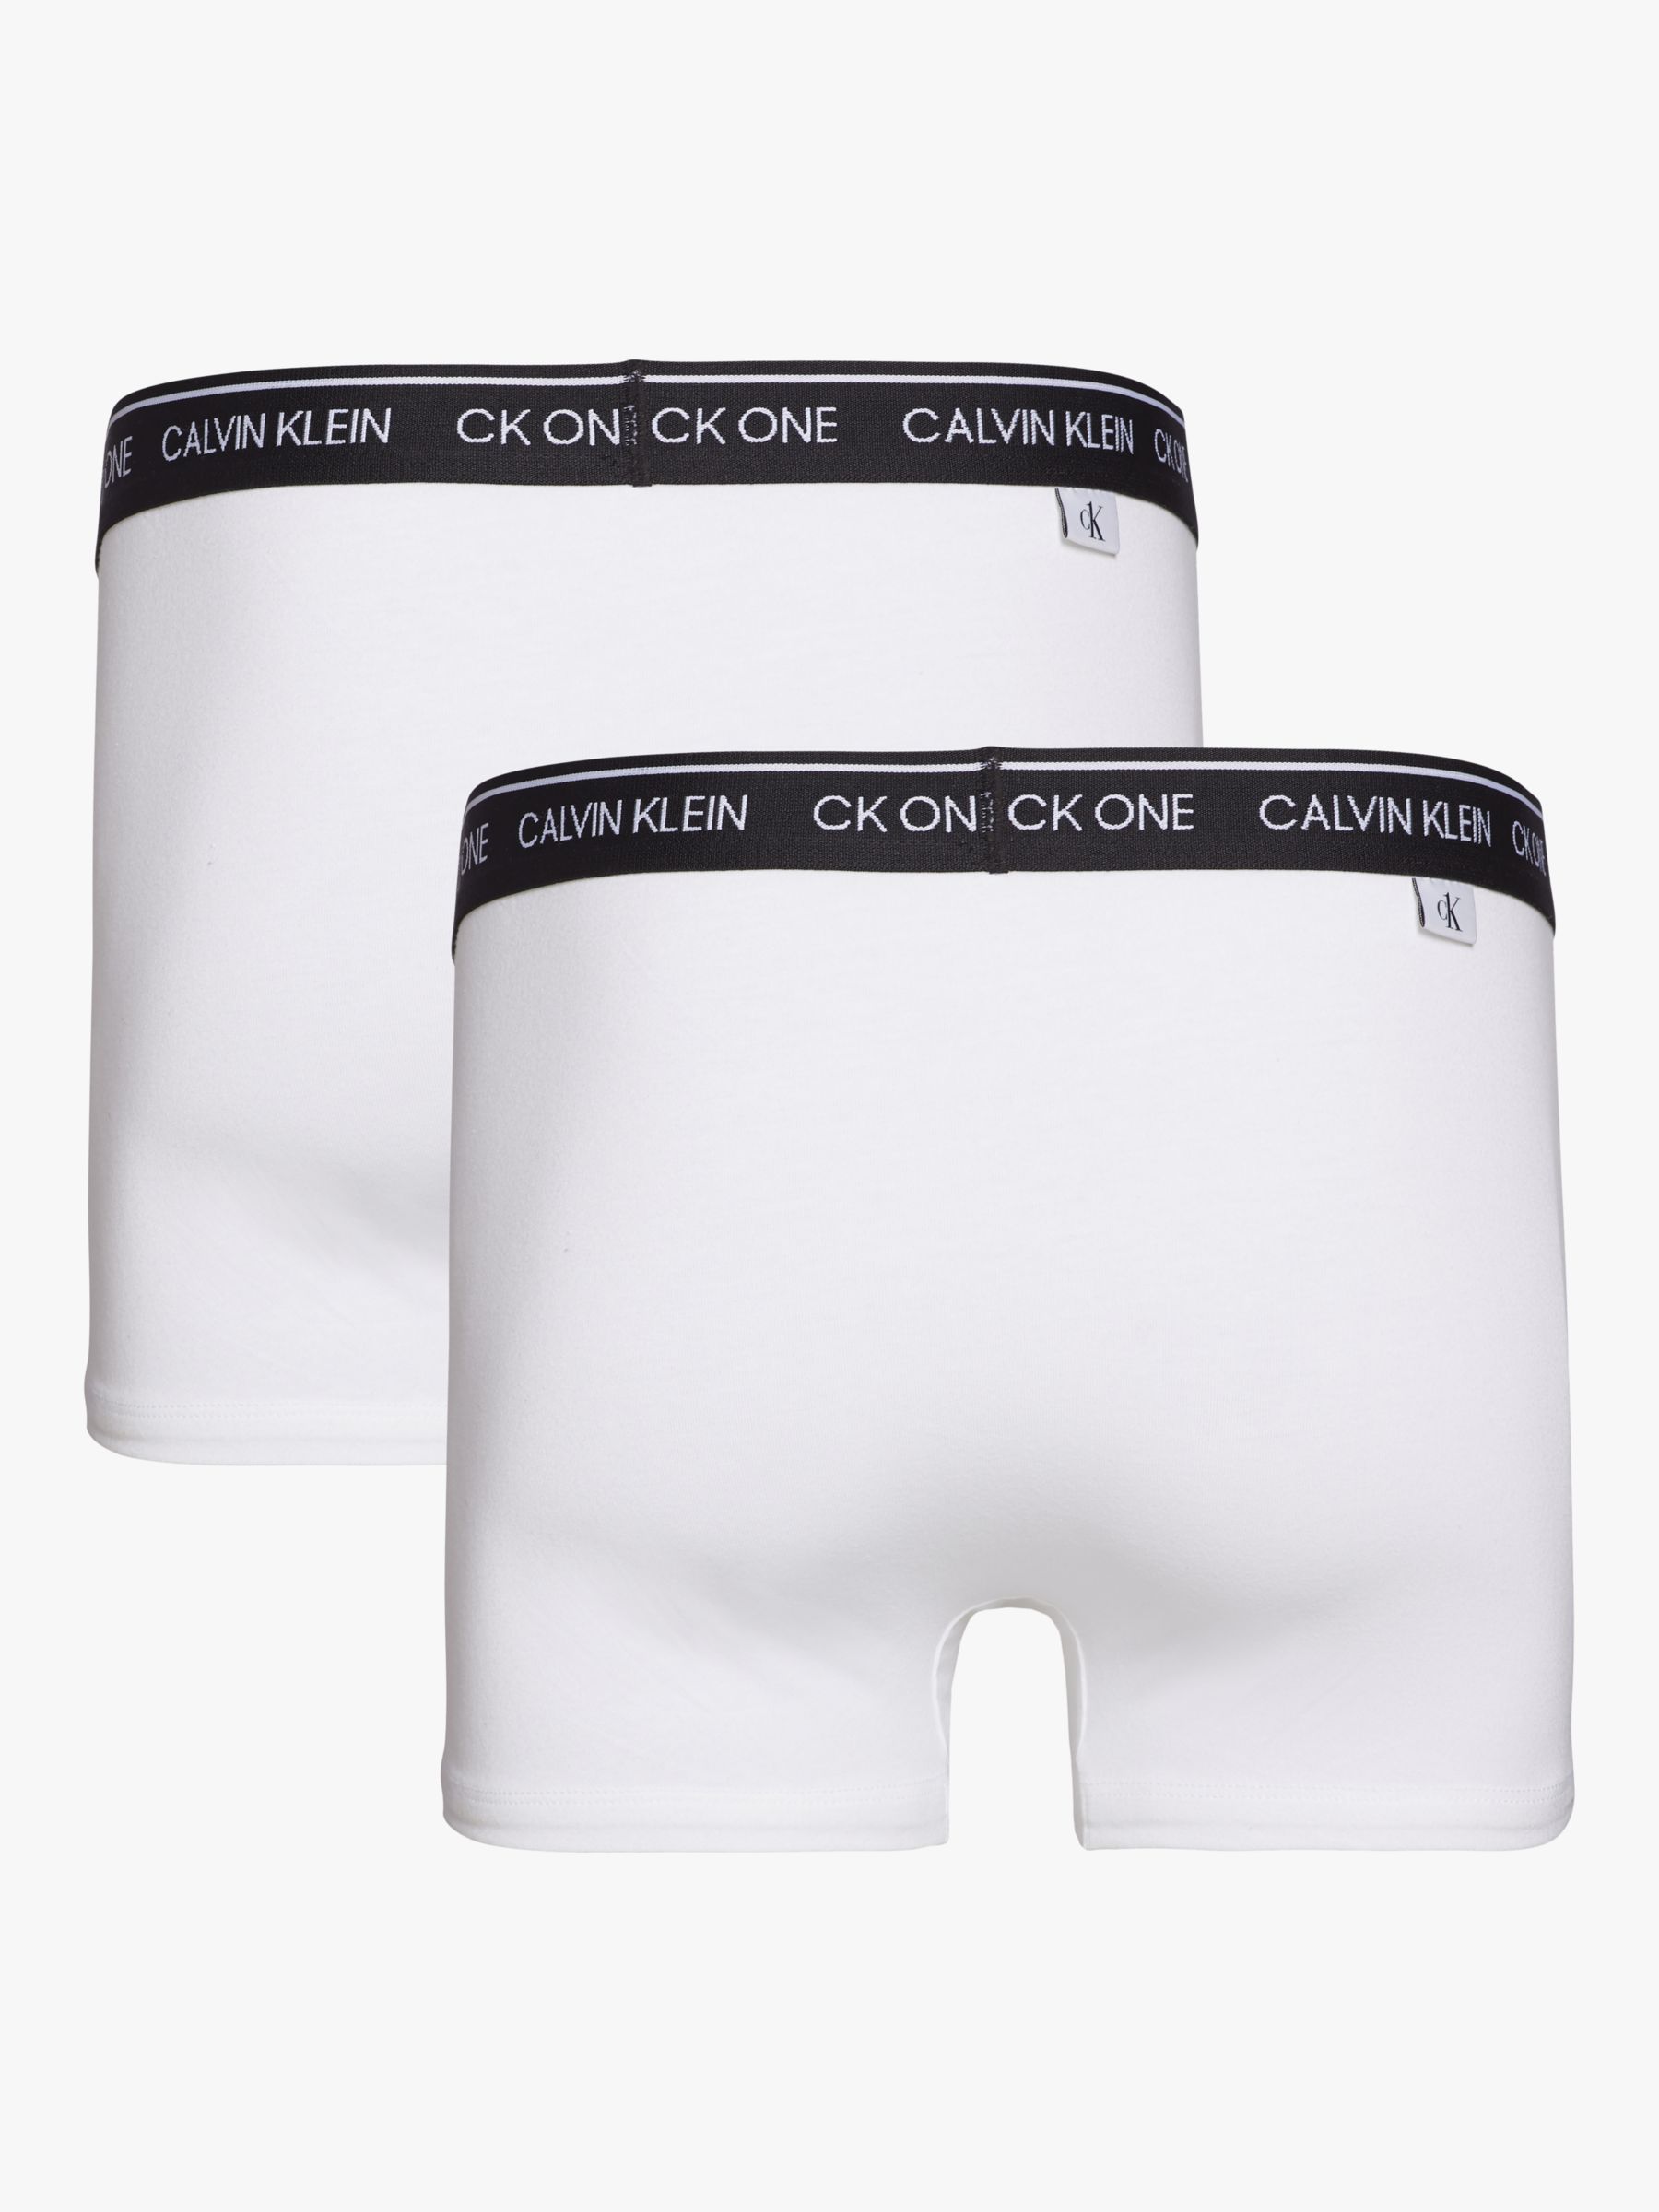 Calvin Klein One CK Cotton Stretch Trunks, Pack of 2, White at John